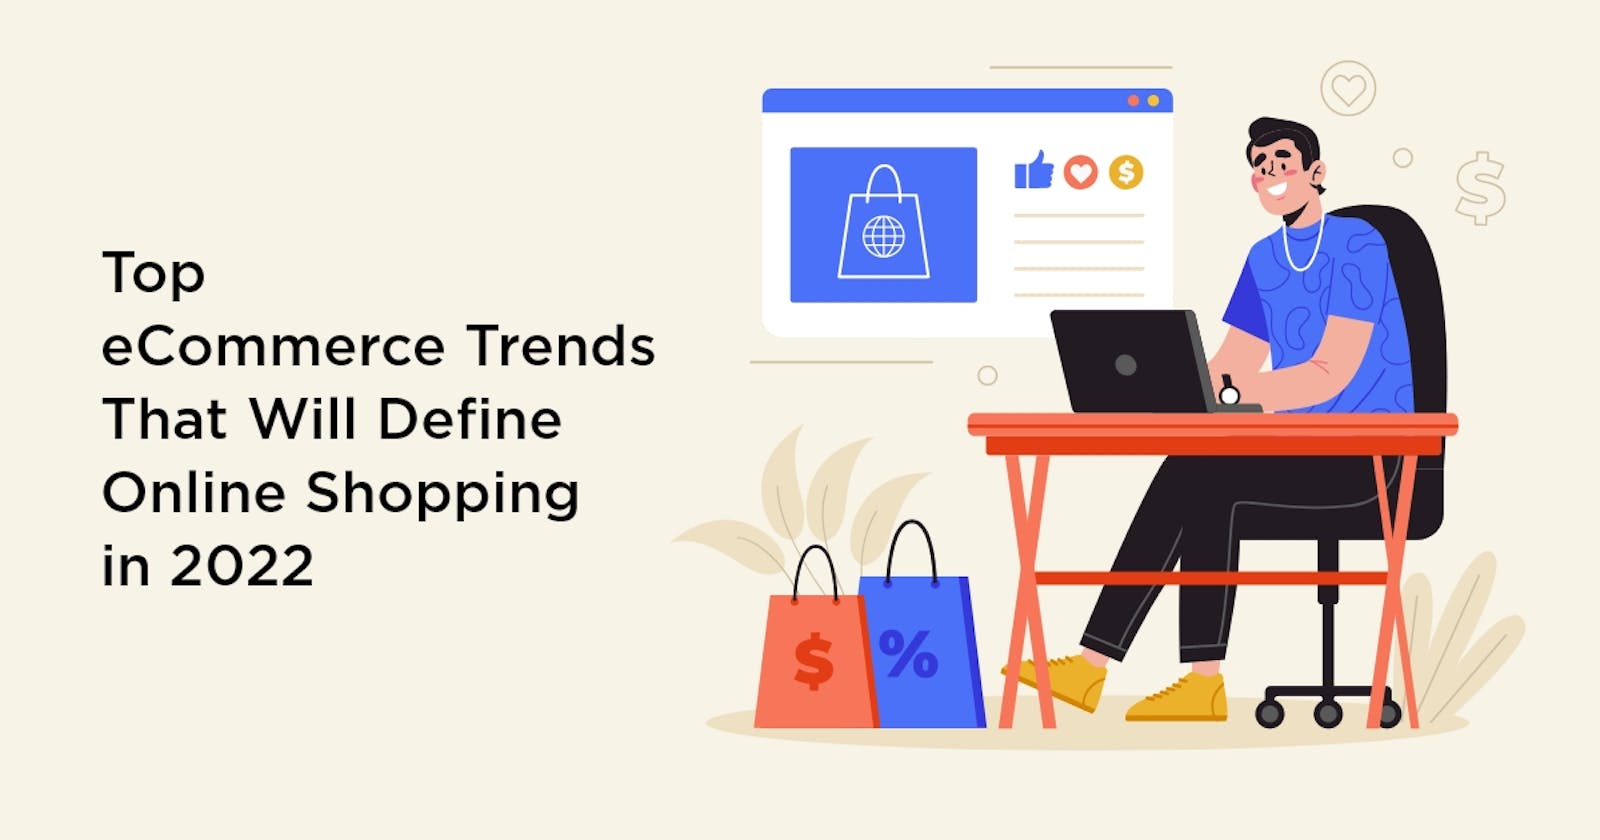 Top eCommerce Trends That Will Shape Online Shopping in 2022